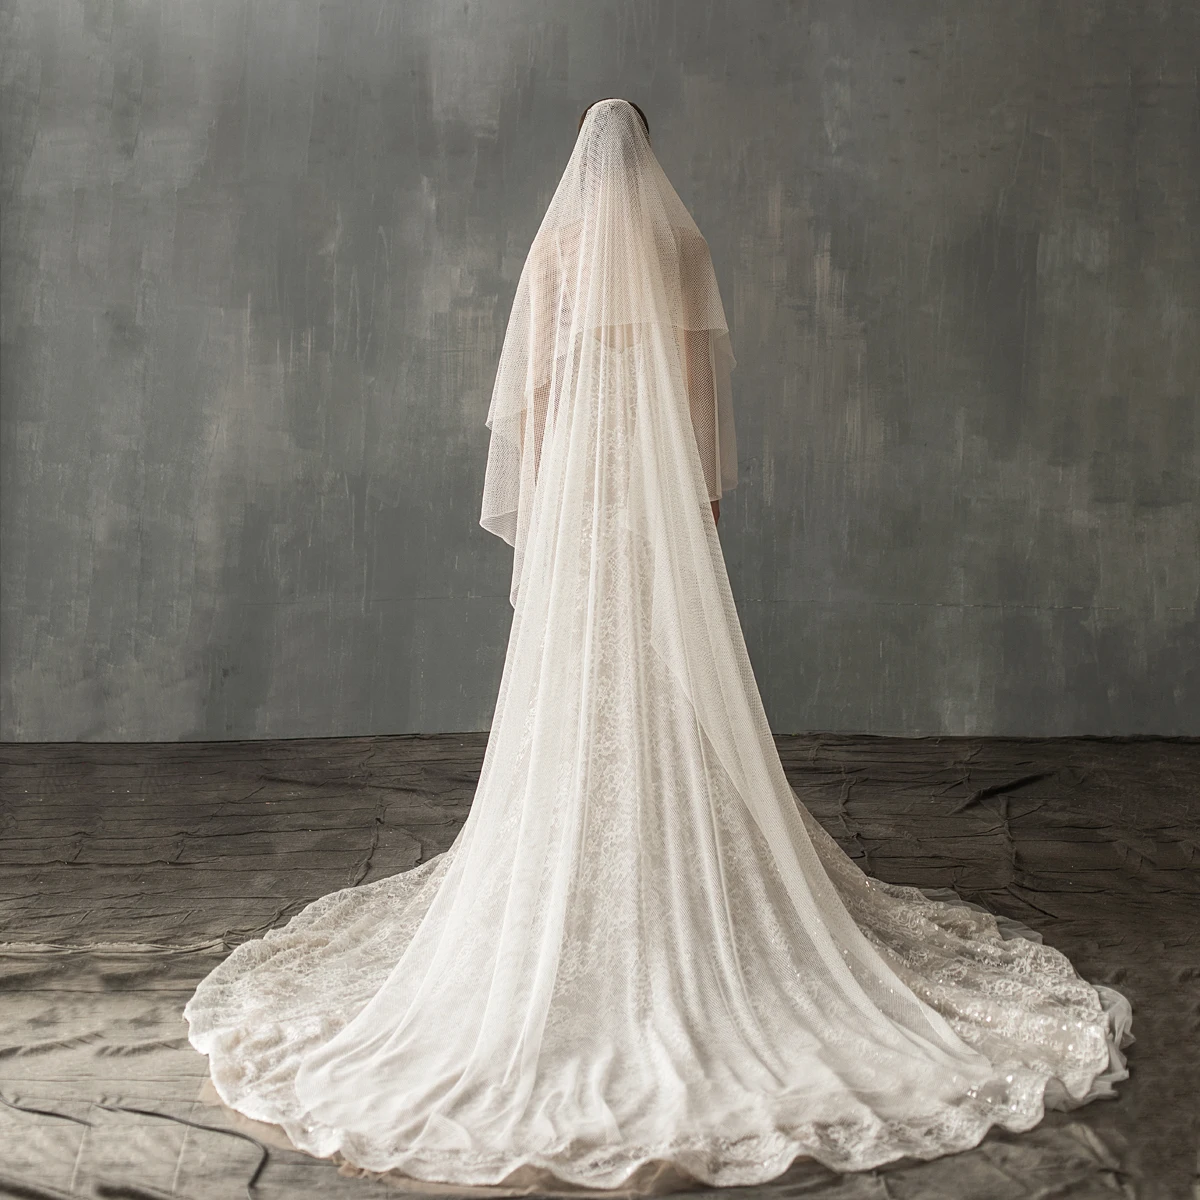 

V640 Luxurious Wedding Bridal Cathedral Veil Two-Layer Spandex Long White Blusher Brides Veil Women Marriage Accessories